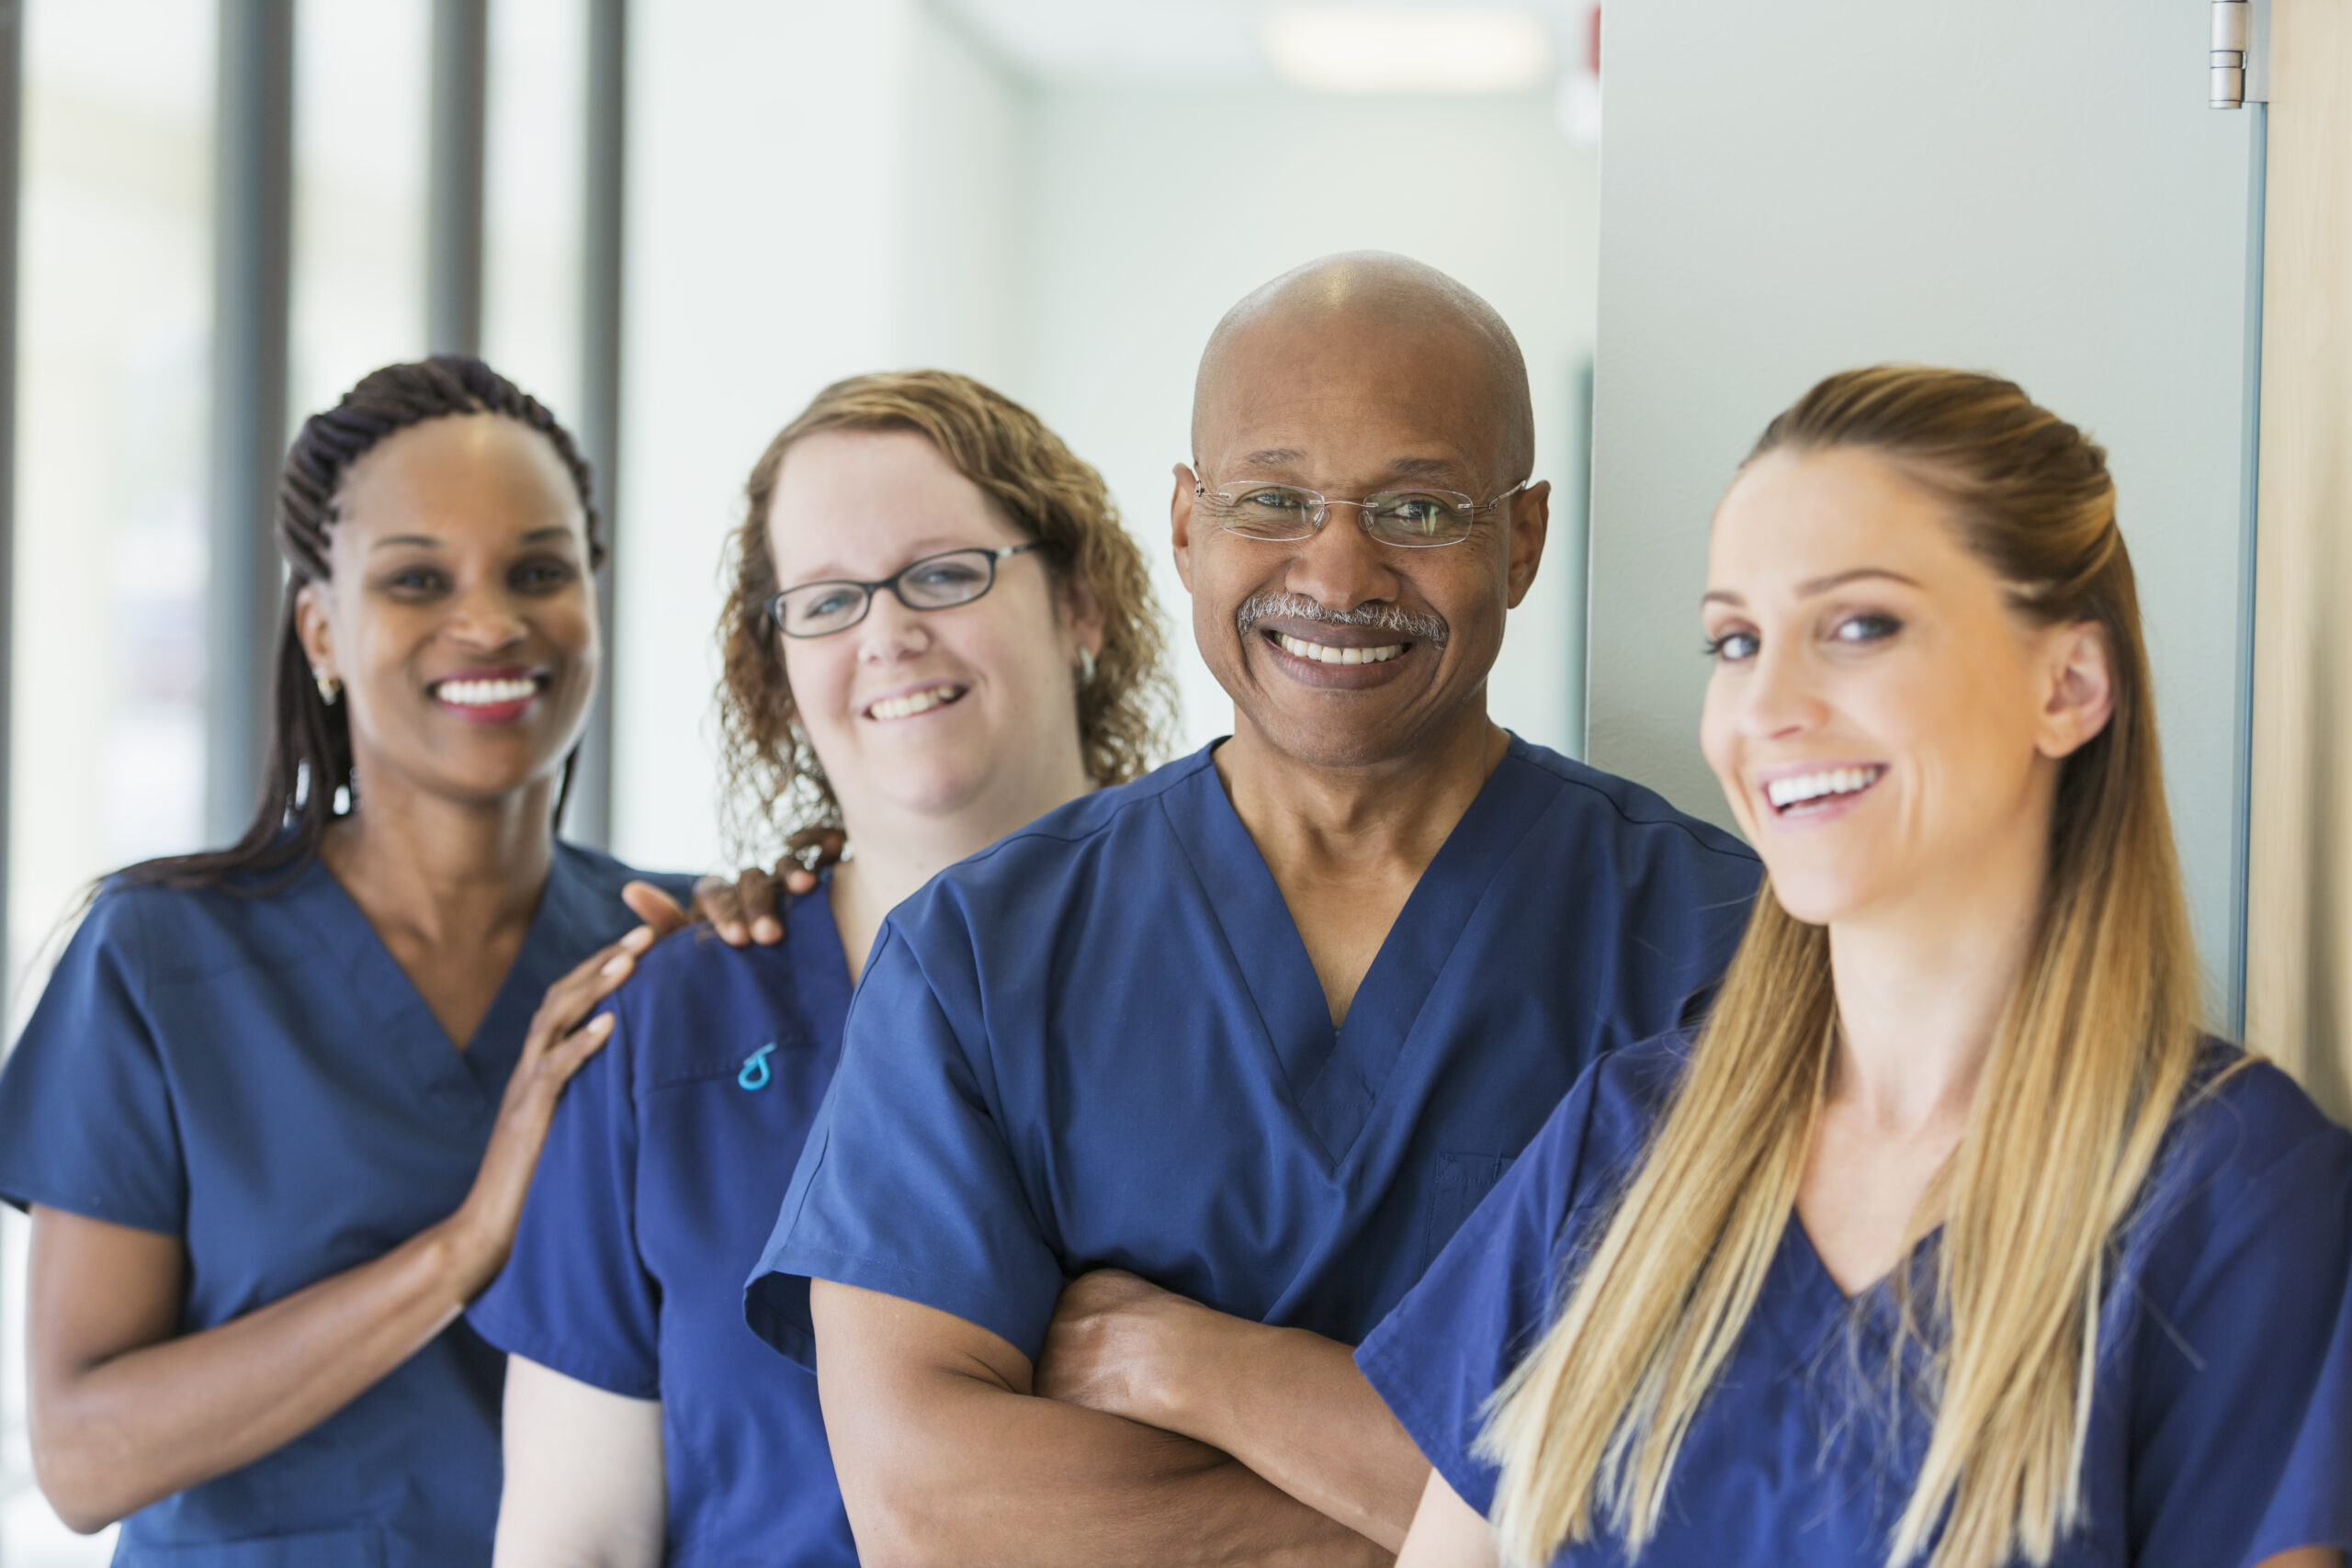 A team of four multi-ethnic medical professionals standing in a corridor, wearing blue scrubs, smiling at the camera. The focus is on the African-American senior man, in his 60s.